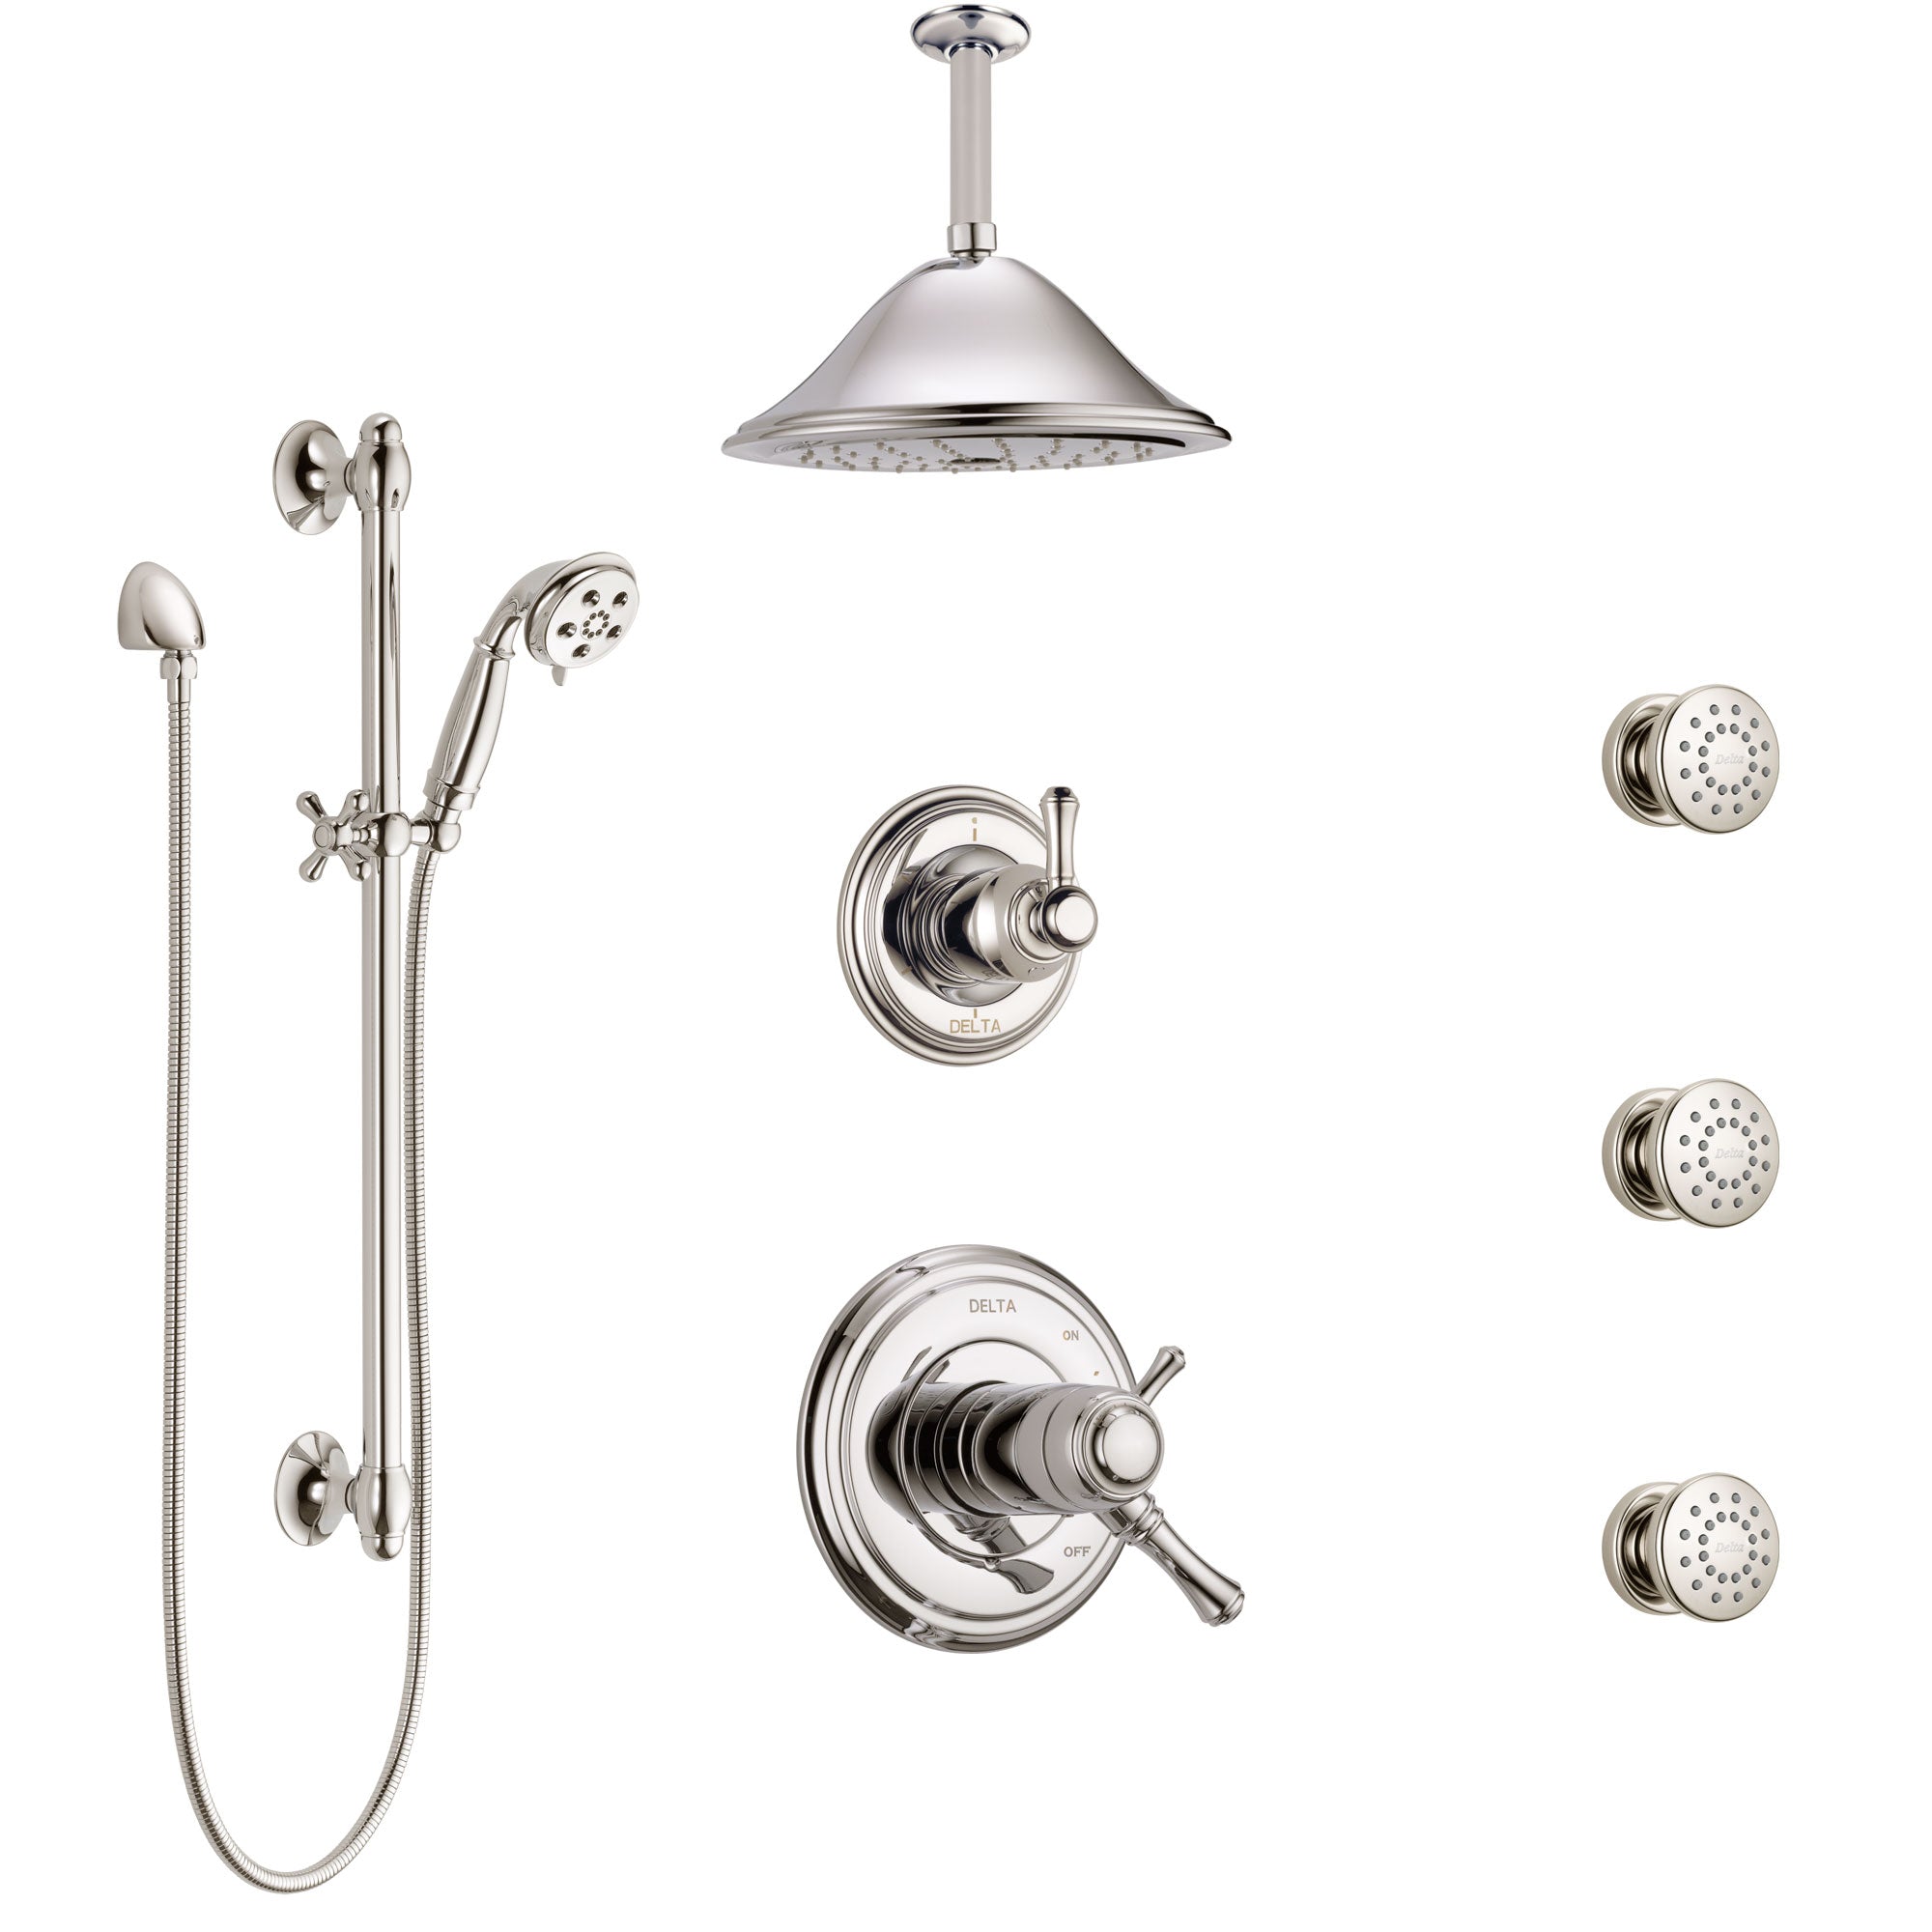 Delta Cassidy Polished Nickel Shower System with Dual Thermostatic Control, Diverter, Ceiling Showerhead, 3 Body Sprays, and Hand Shower SS17T971PN1